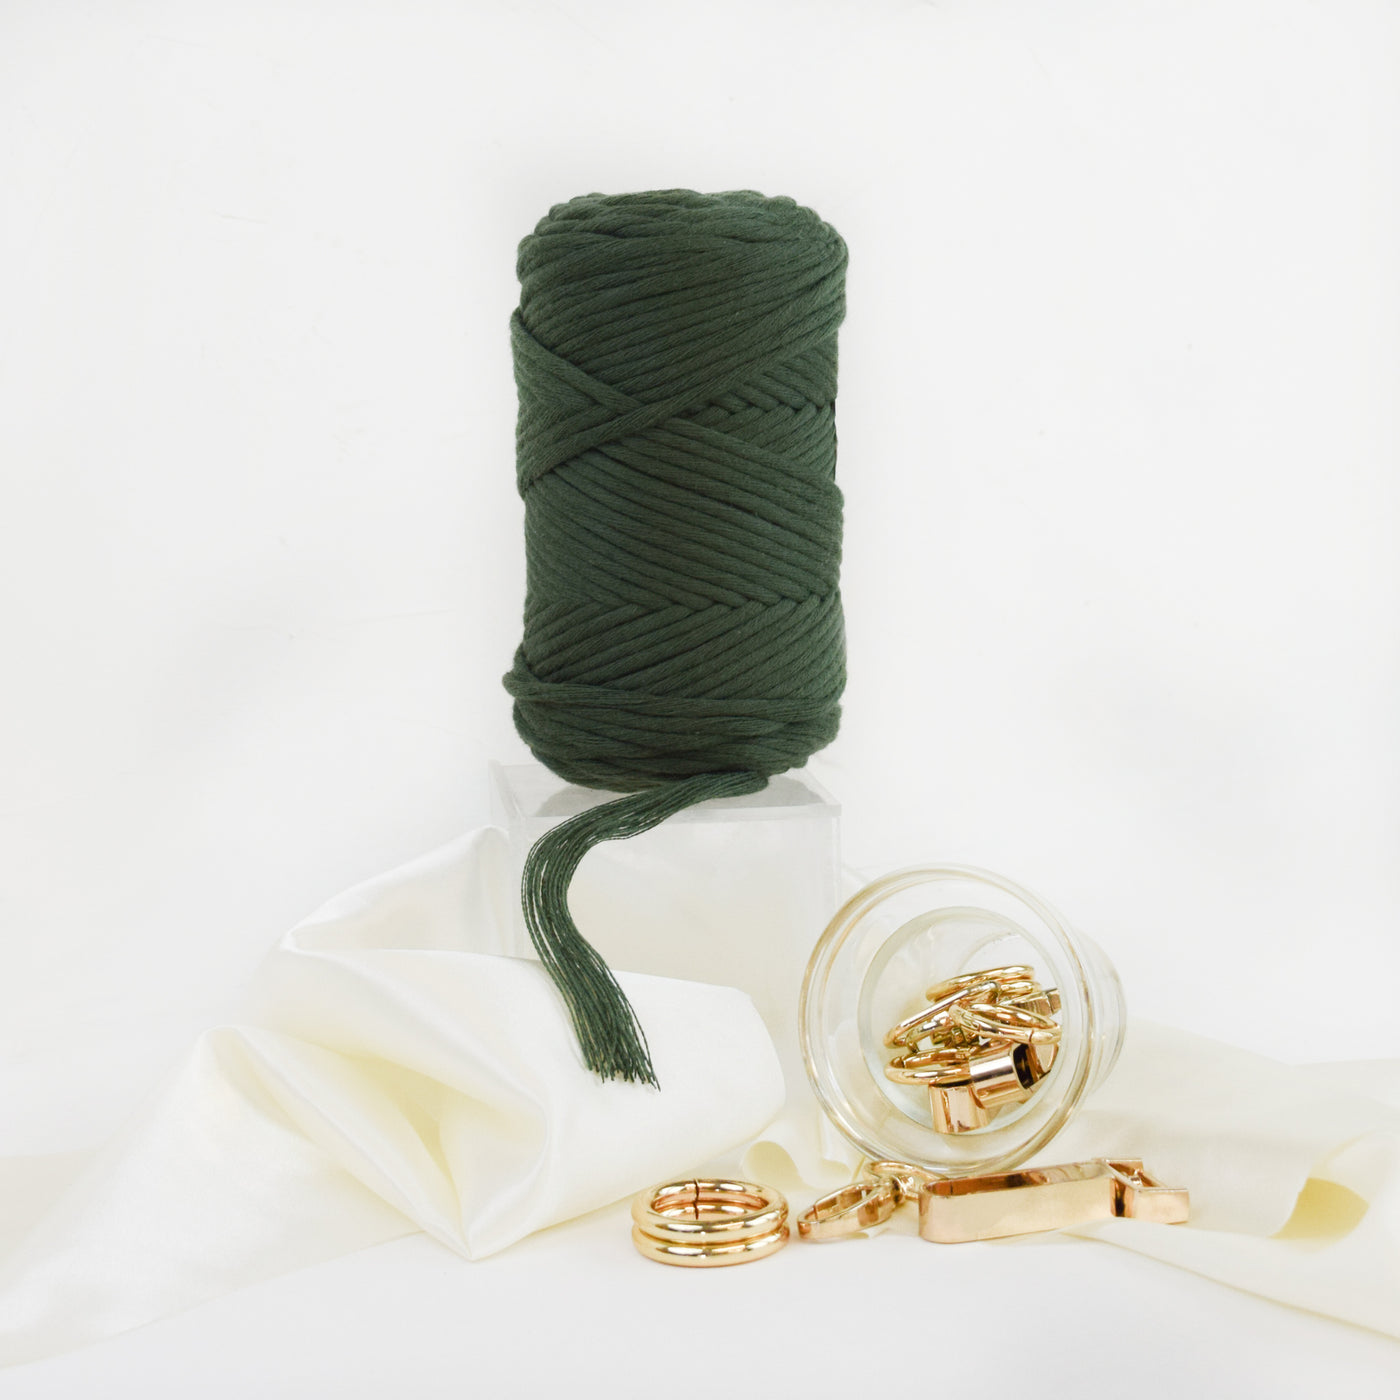 COTTON - VISCOSE ROLL 4 MM - OLIVE GREEN COLOR | LIMITED EDITION